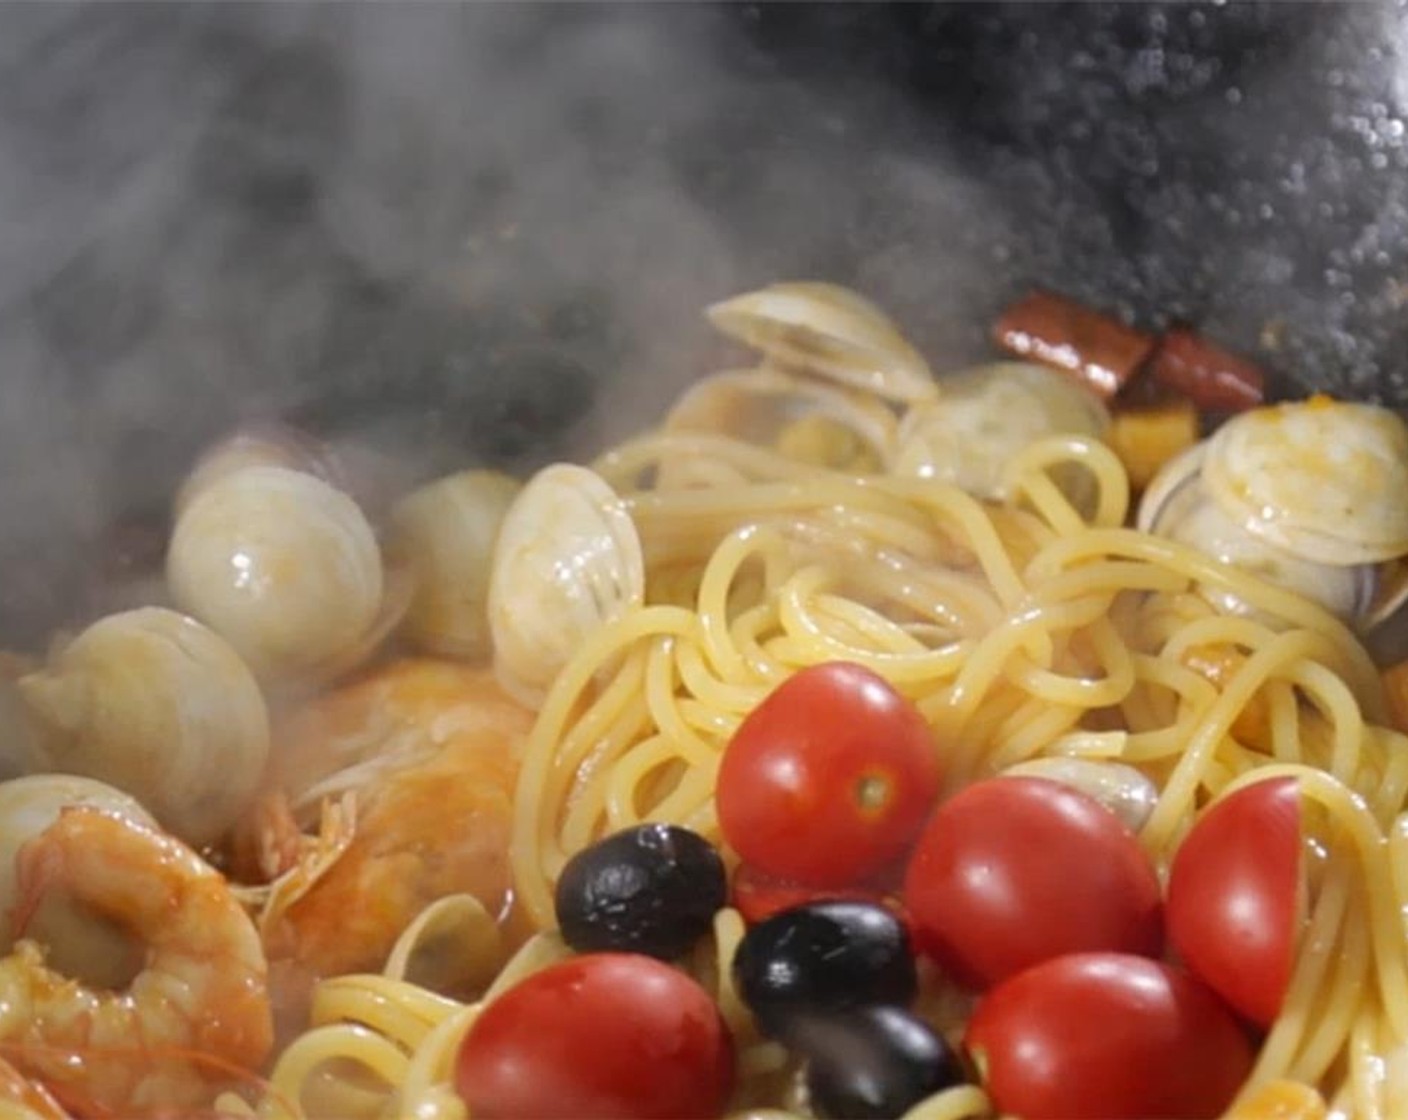 step 5 Then stir in cooked spaghetti, cherry tomatoes and Black Olives (2 Tbsp), shrimp and clam. Toss everything together and cook for an additional minute.